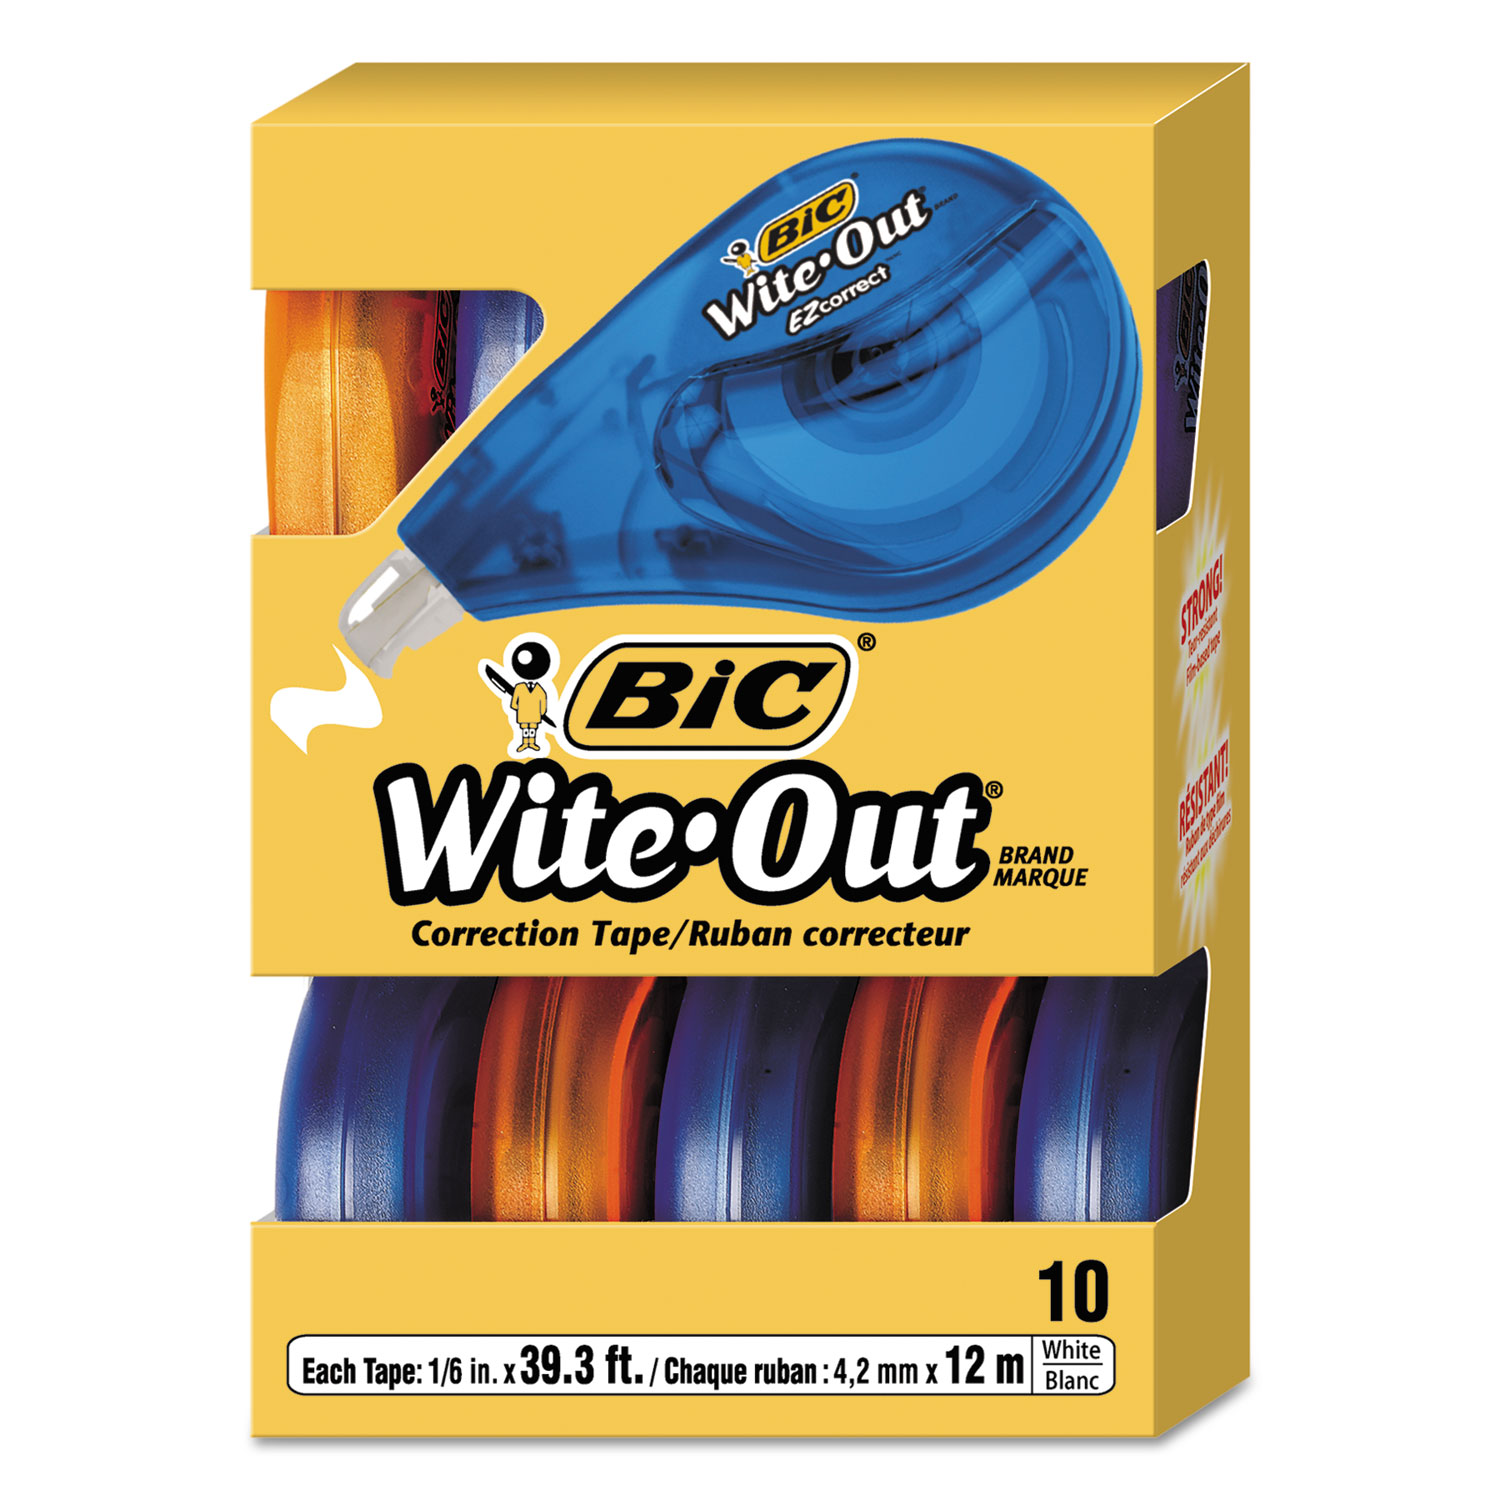  BIC WOTAP10 Wite-Out EZ Correct Correction Tape, Non-Refillable, 1/6 x 472, 10/Box (BICWOTAP10) 